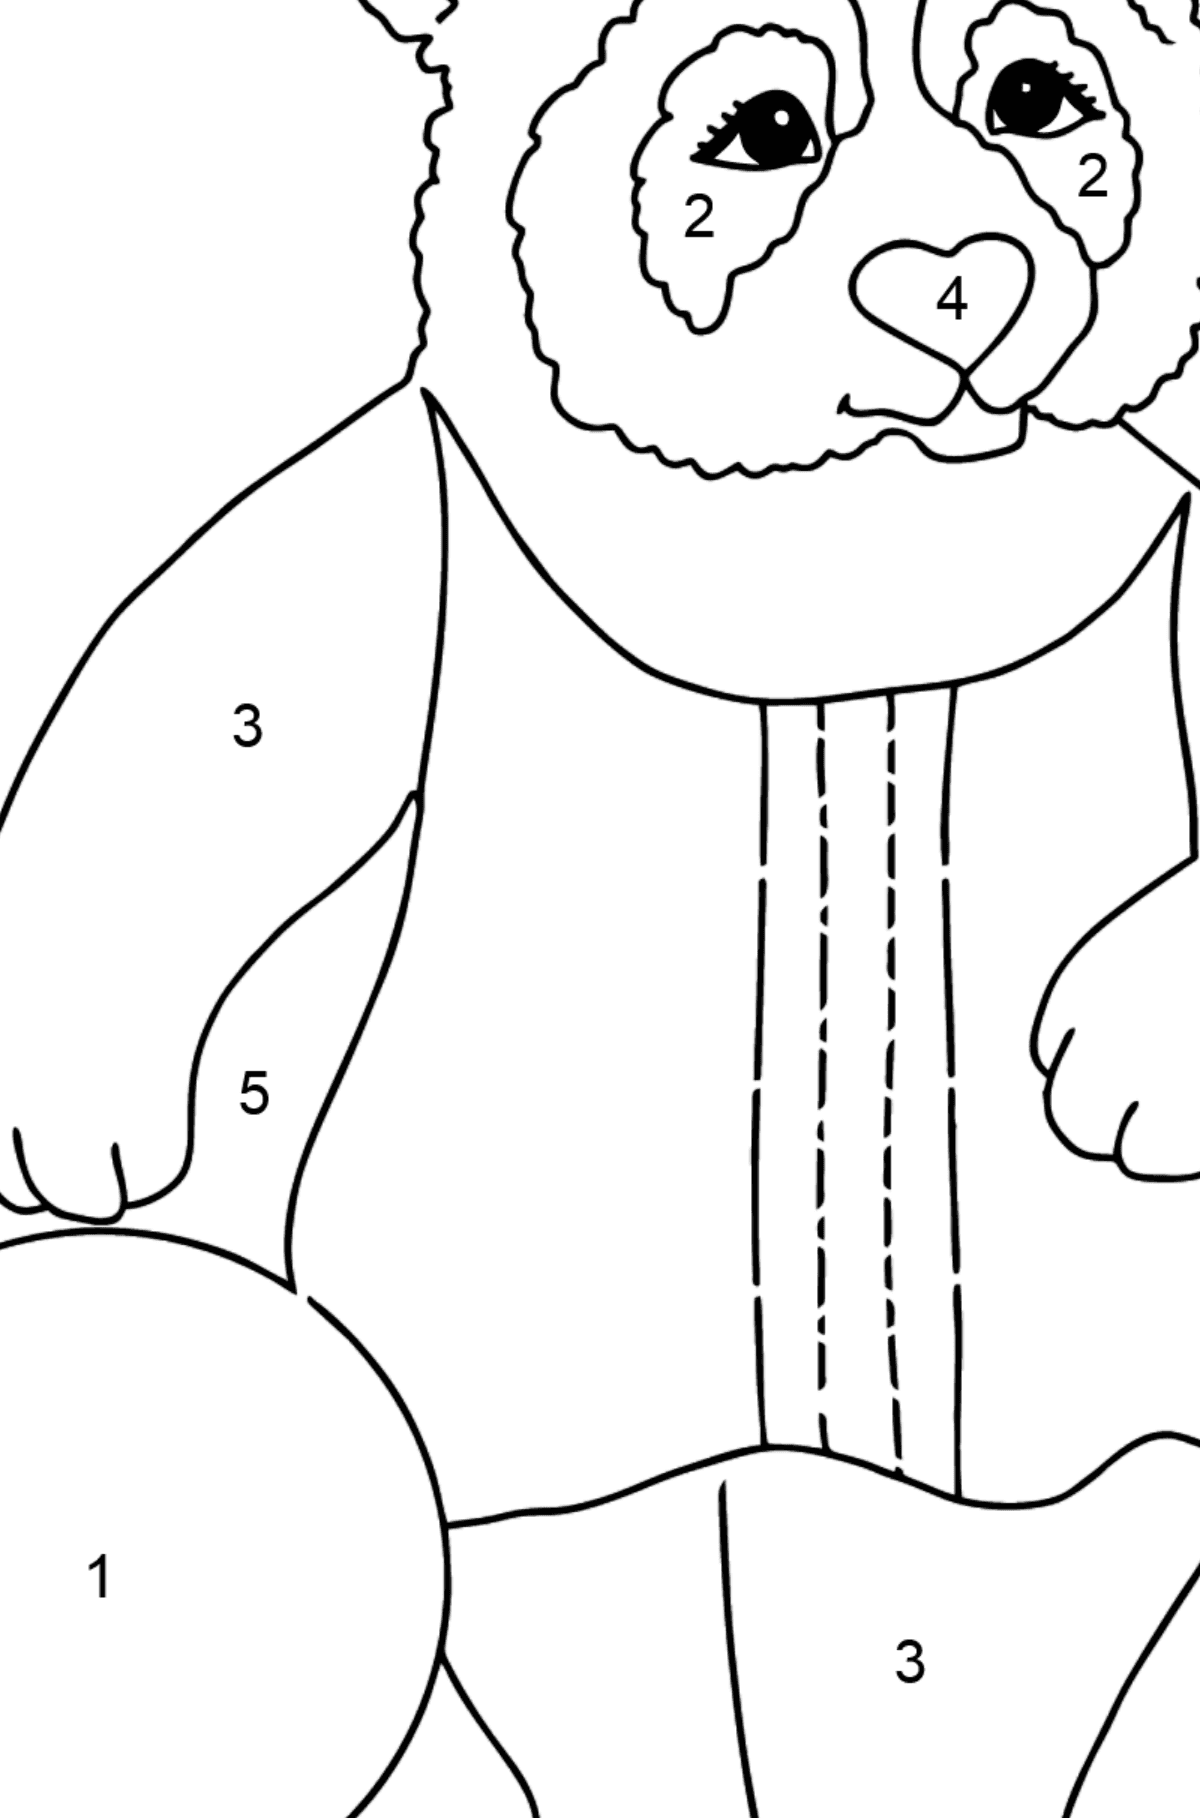 Panda For Babies (Simple) coloring page - Coloring by Numbers for Kids